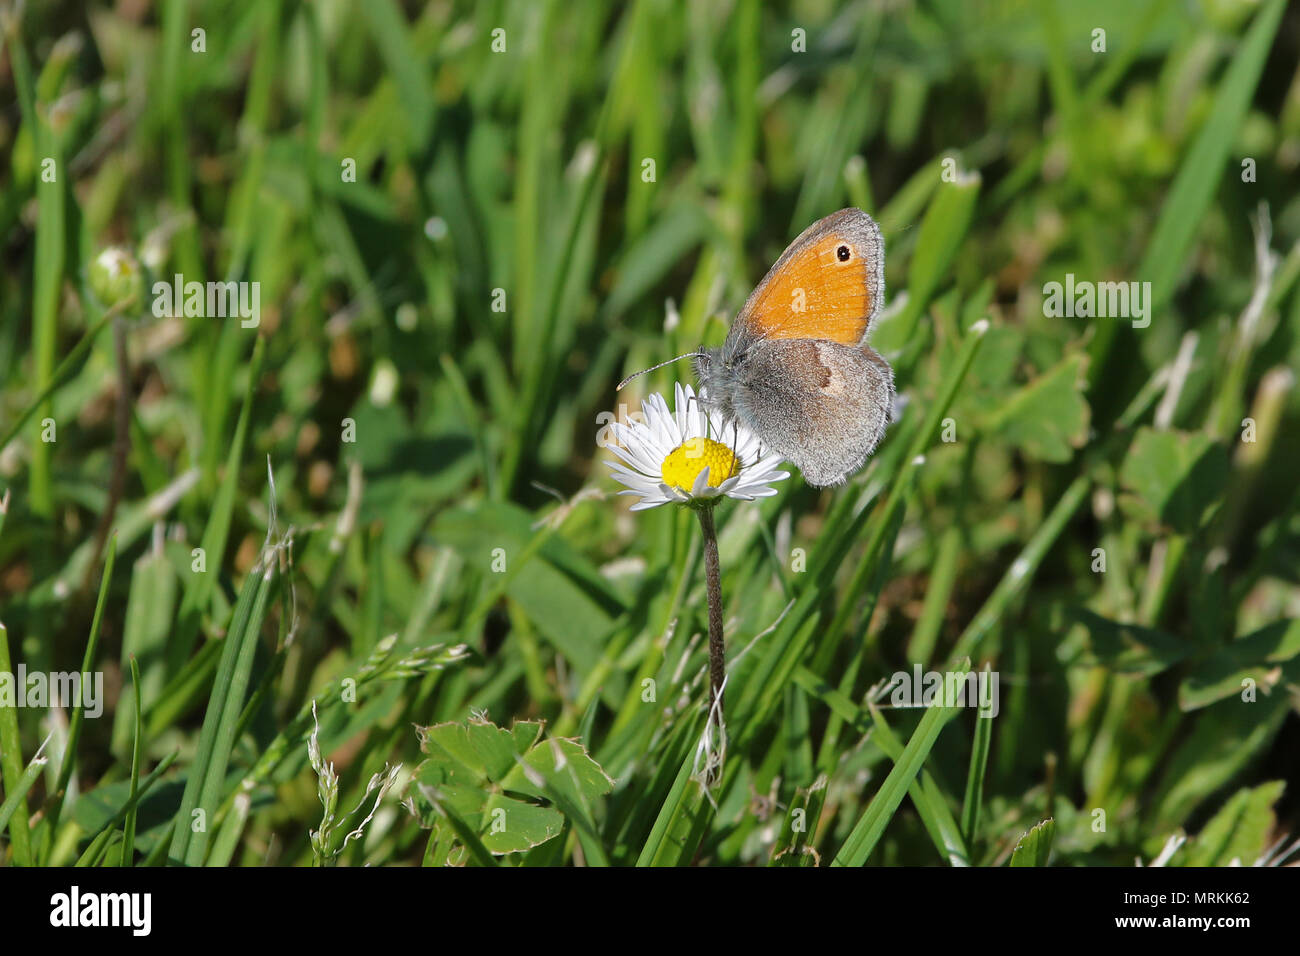 tiny small heath butterfly close up Latin coenonympha pamphilus feeding on a daisy in a field of daisies Latin bellis perennis compositae in Italy Stock Photo